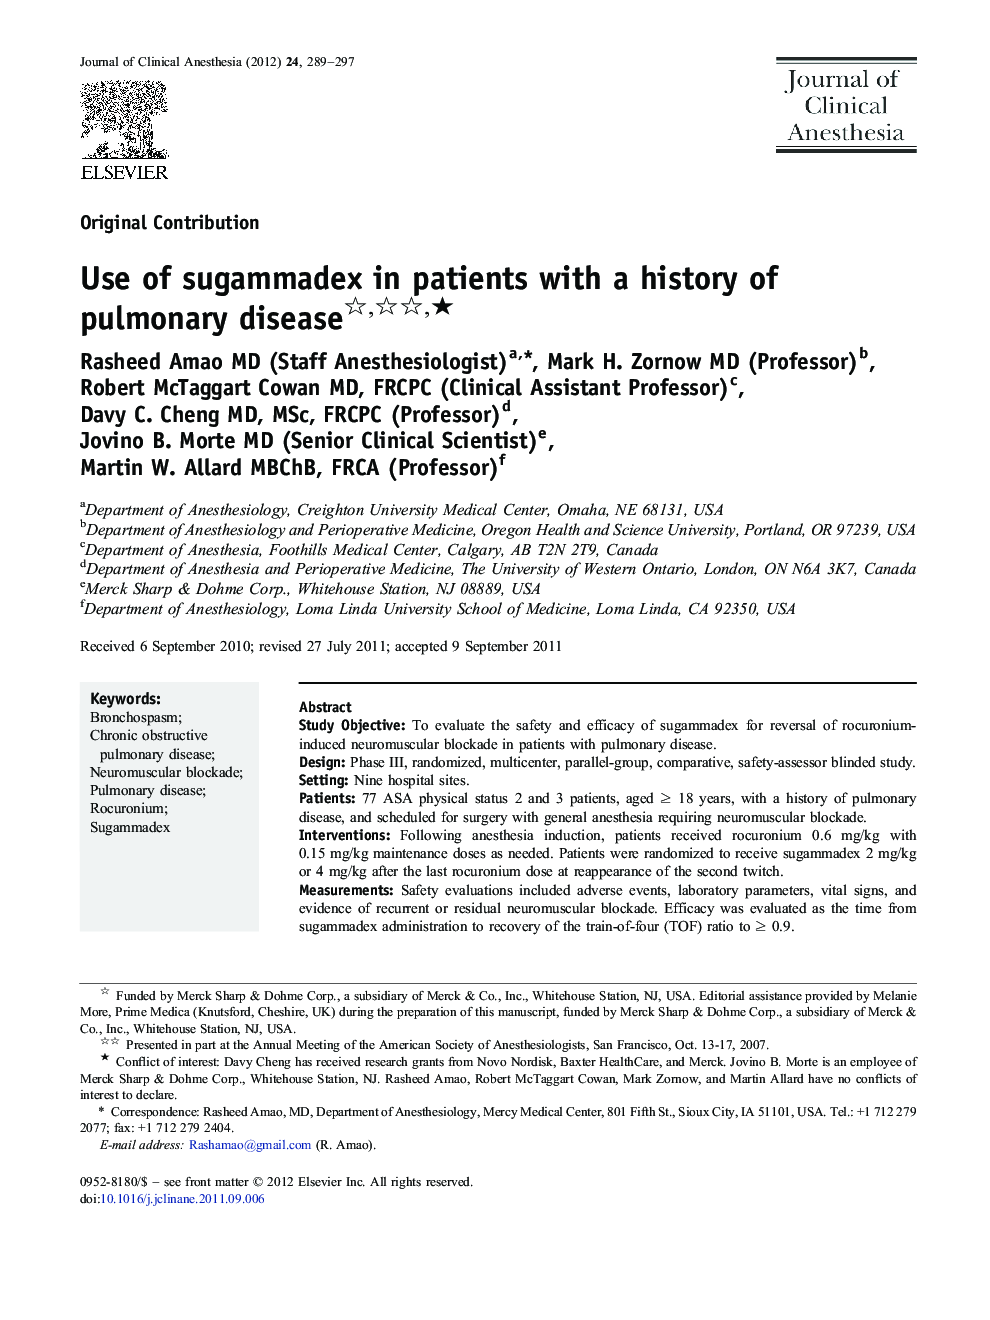 Original ContributionUse of sugammadex in patients with a history of pulmonary diseaseâ